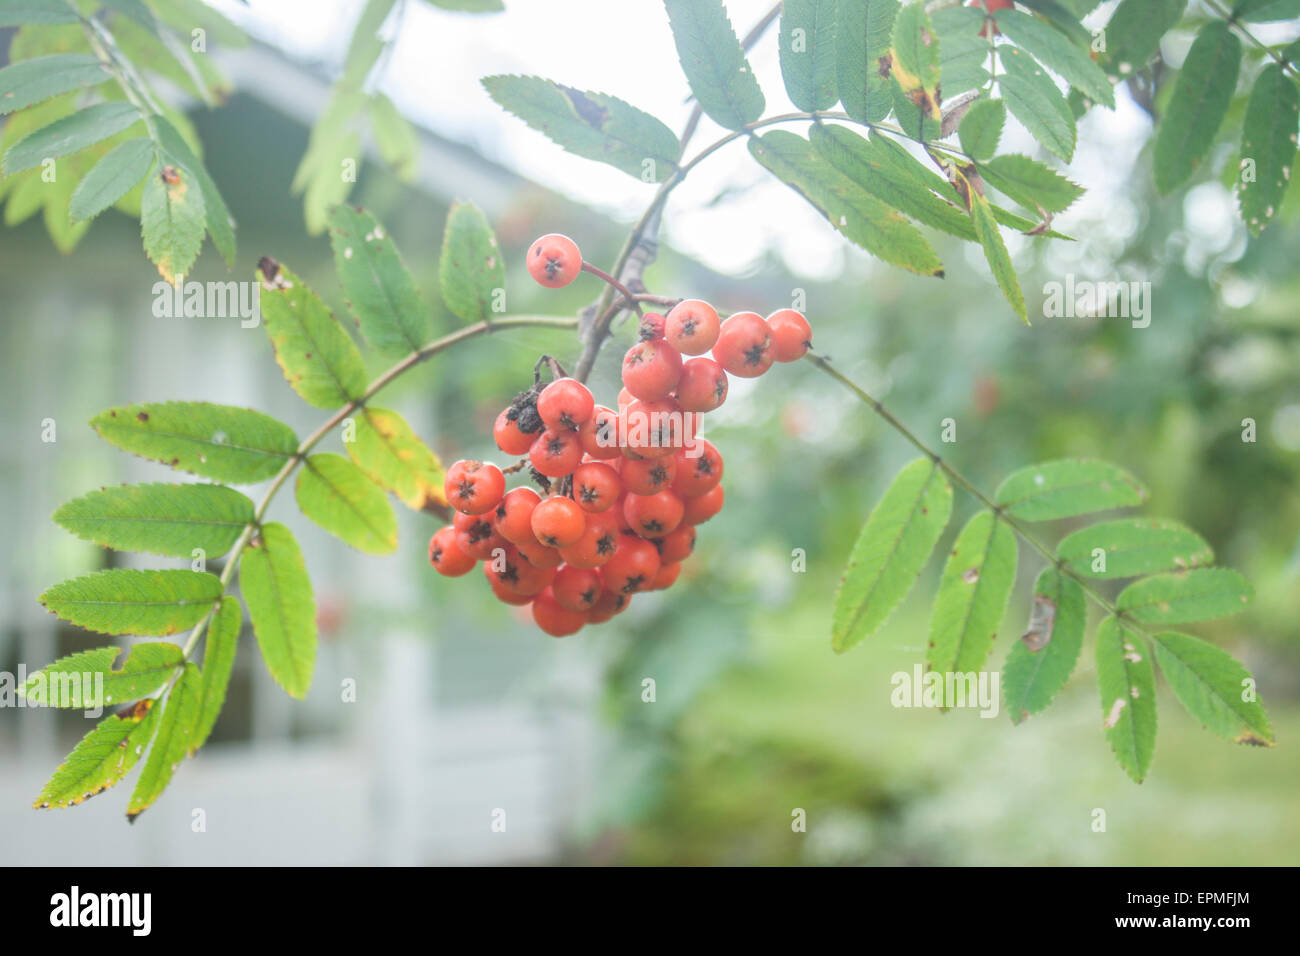 Rowanberrys hanging from a tree, in a garden Stock Photo